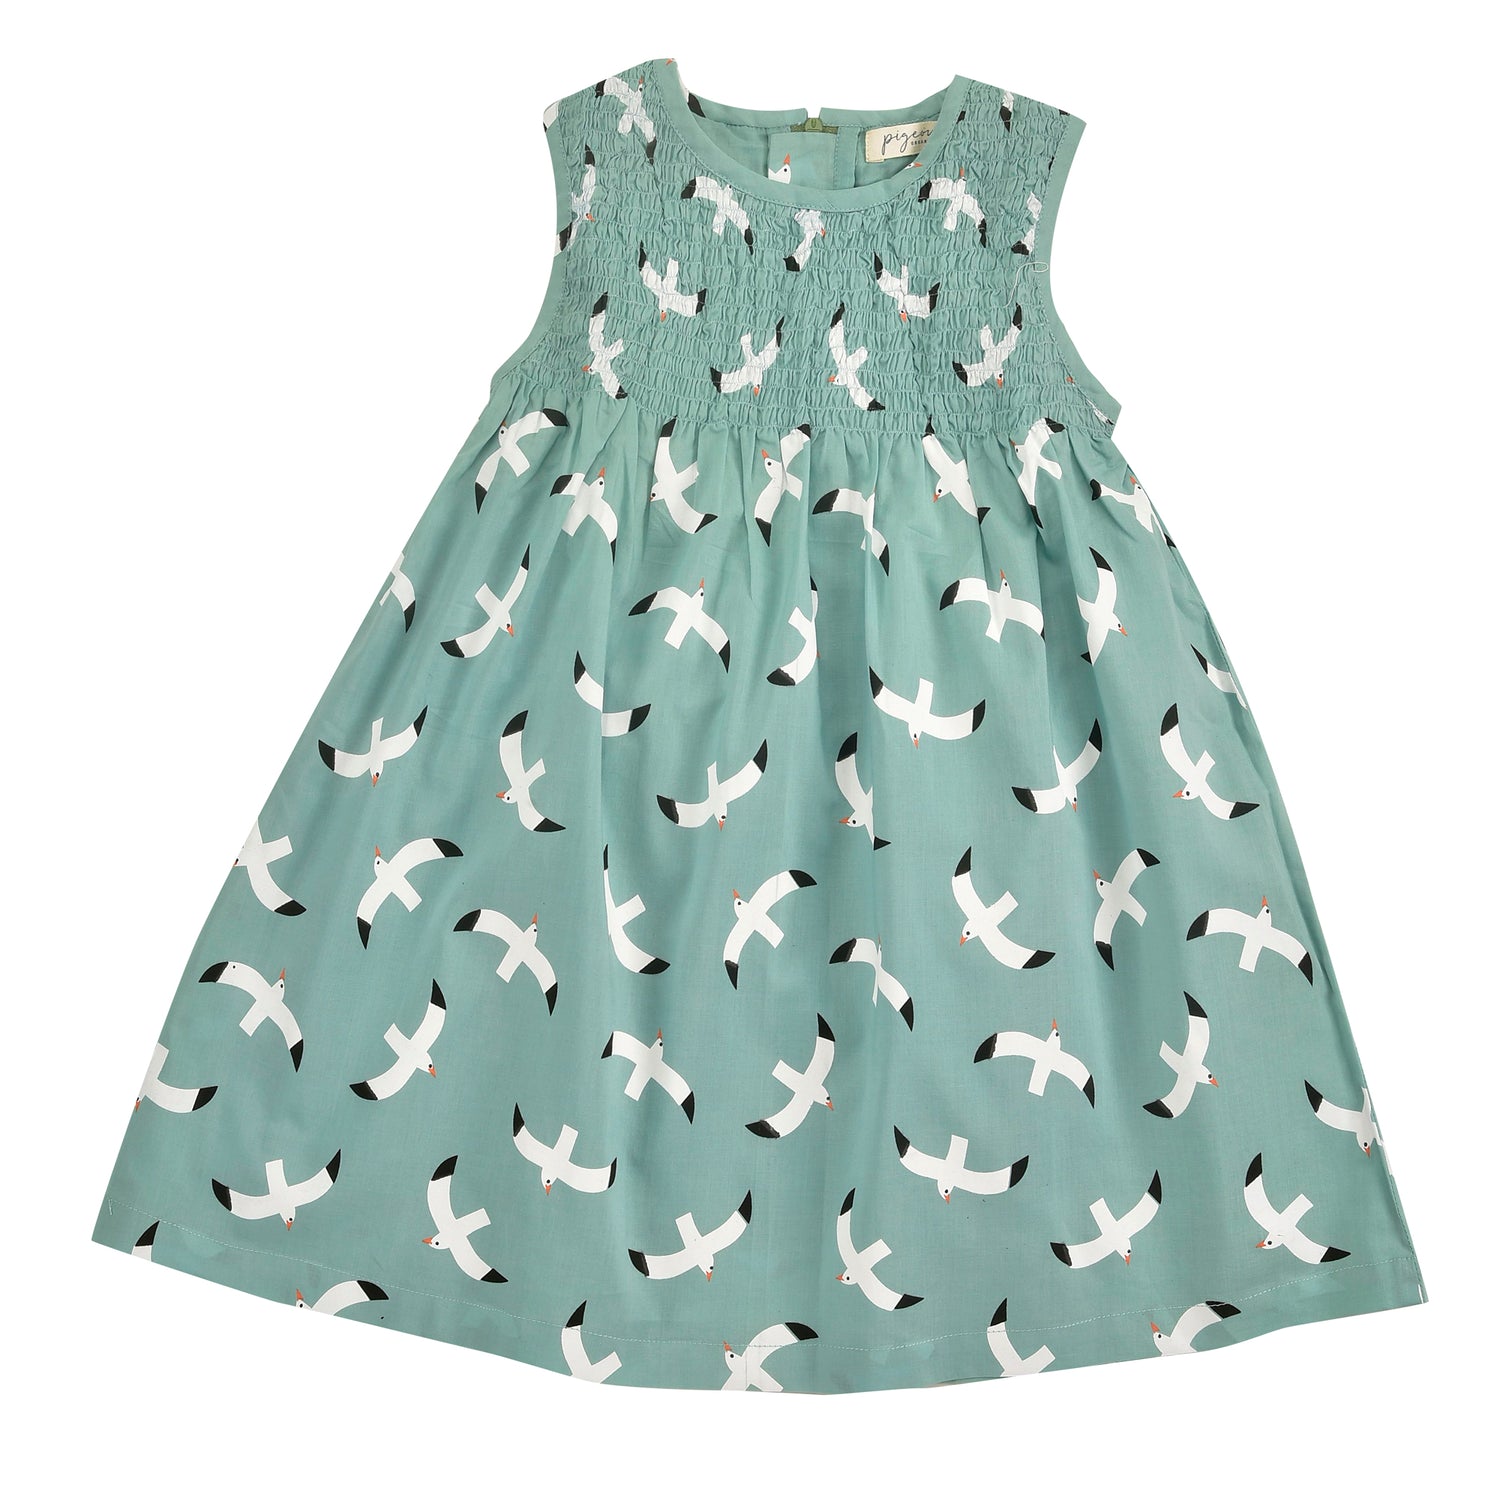 Summer dress in green with seagull print